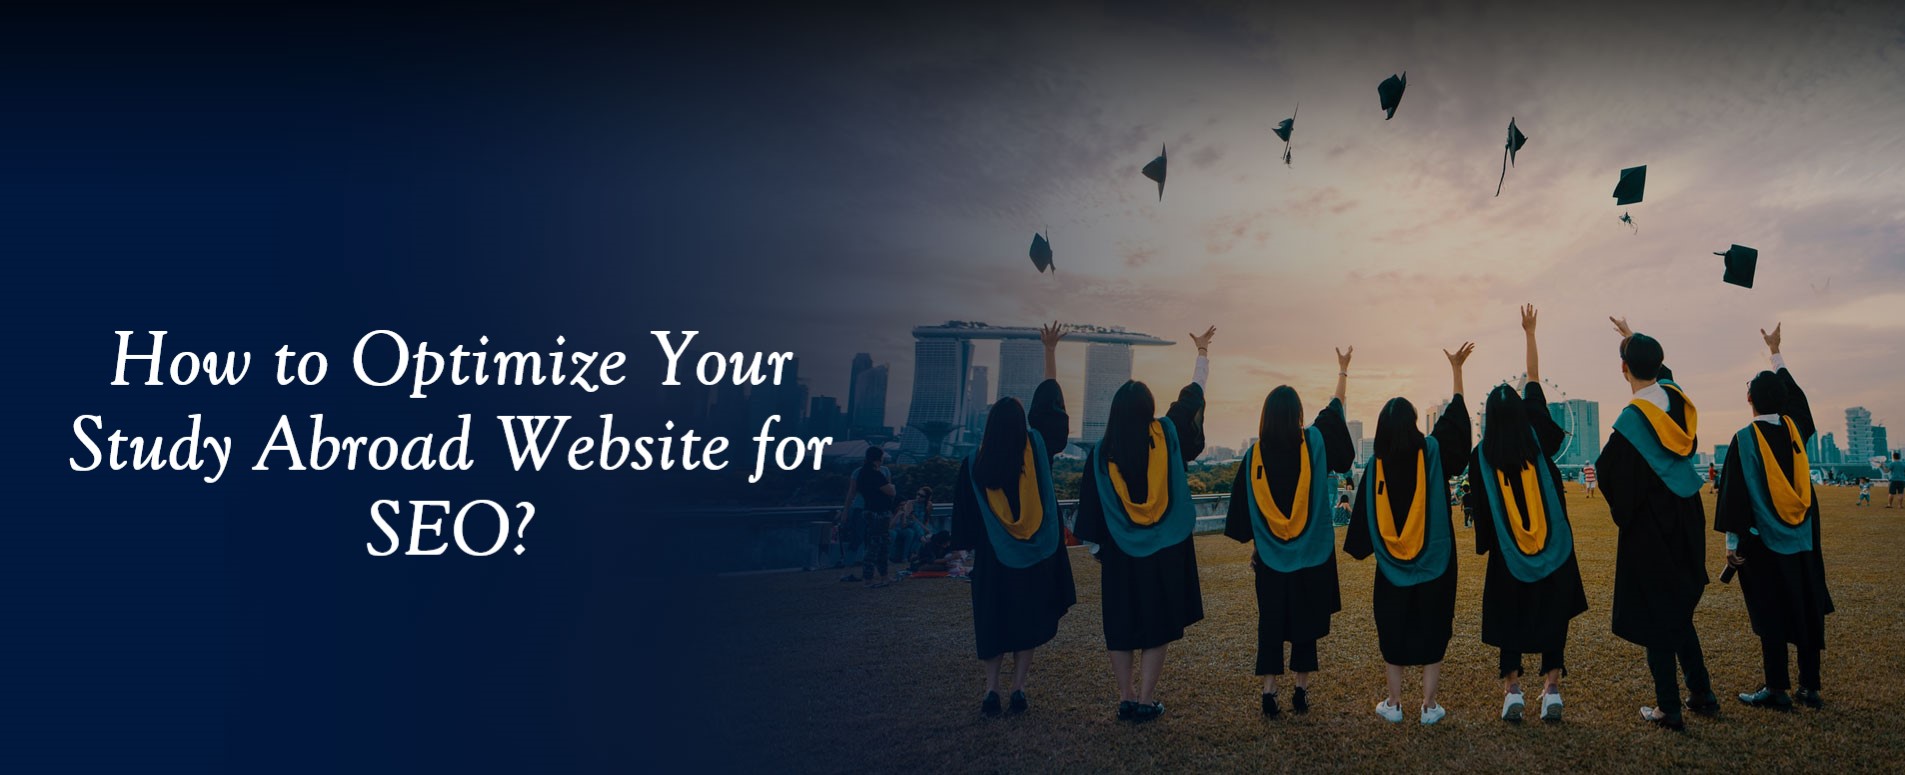 How to Optimize Your Study Abroad Website for SEO?